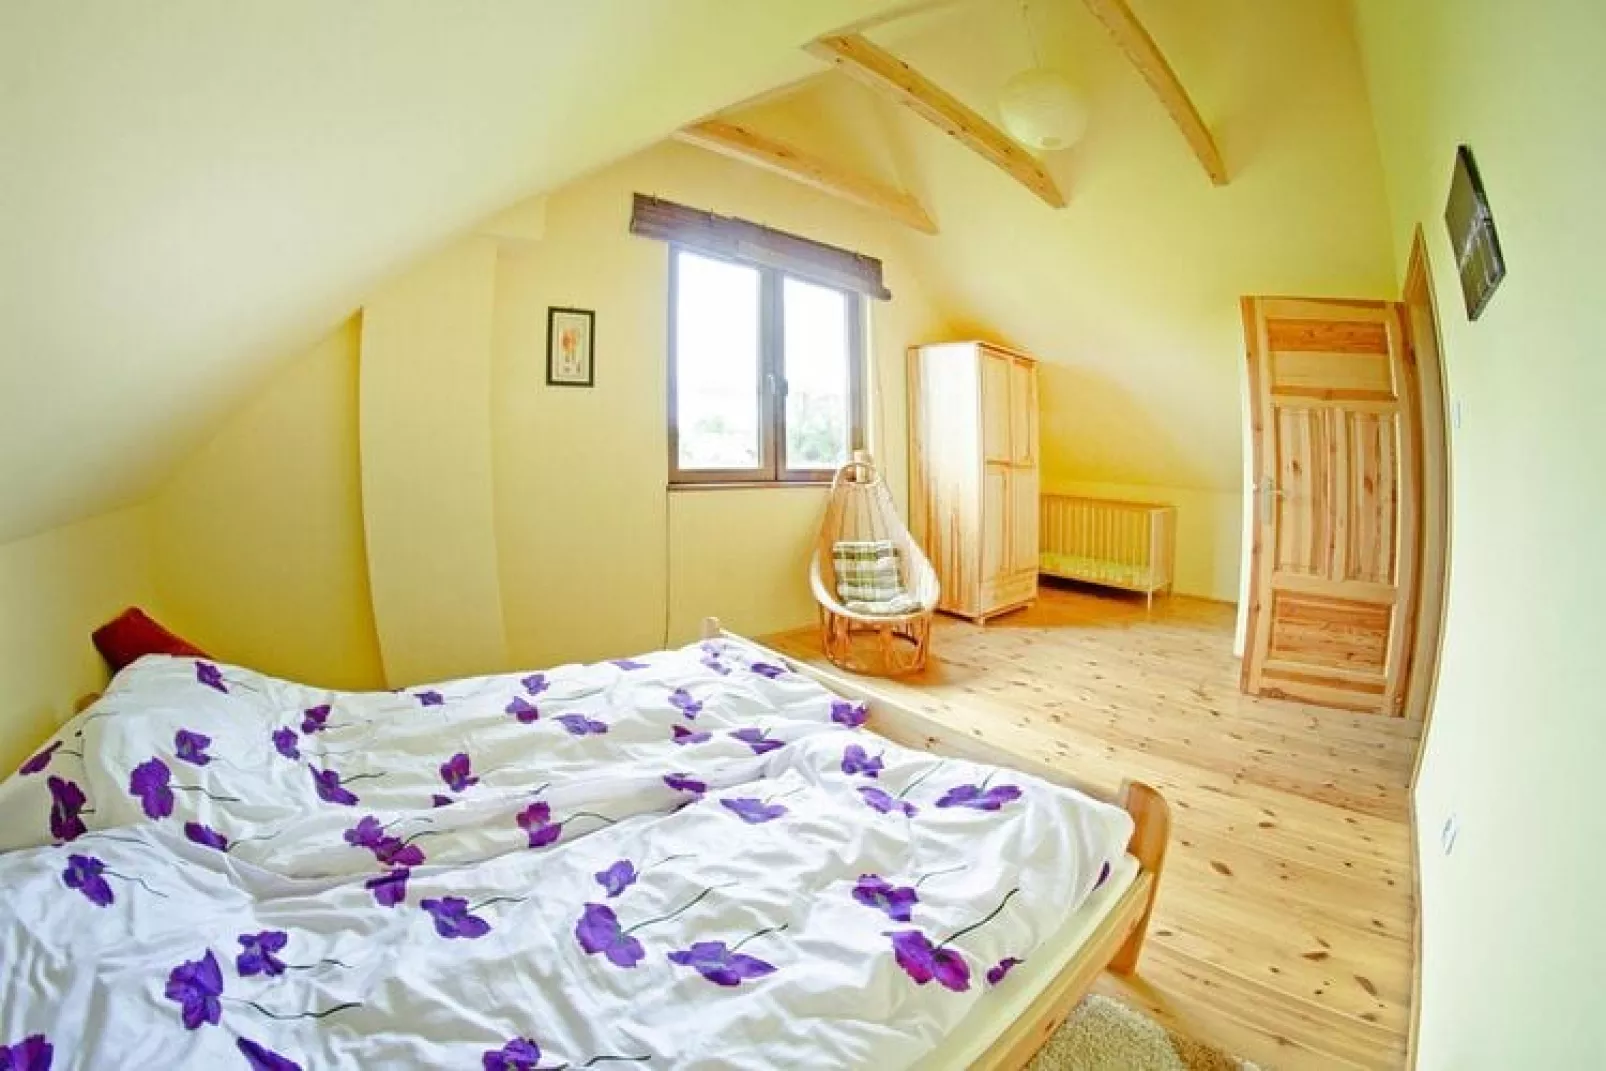 Holiday homes in Swinoujście for 7 persons - 90 qm